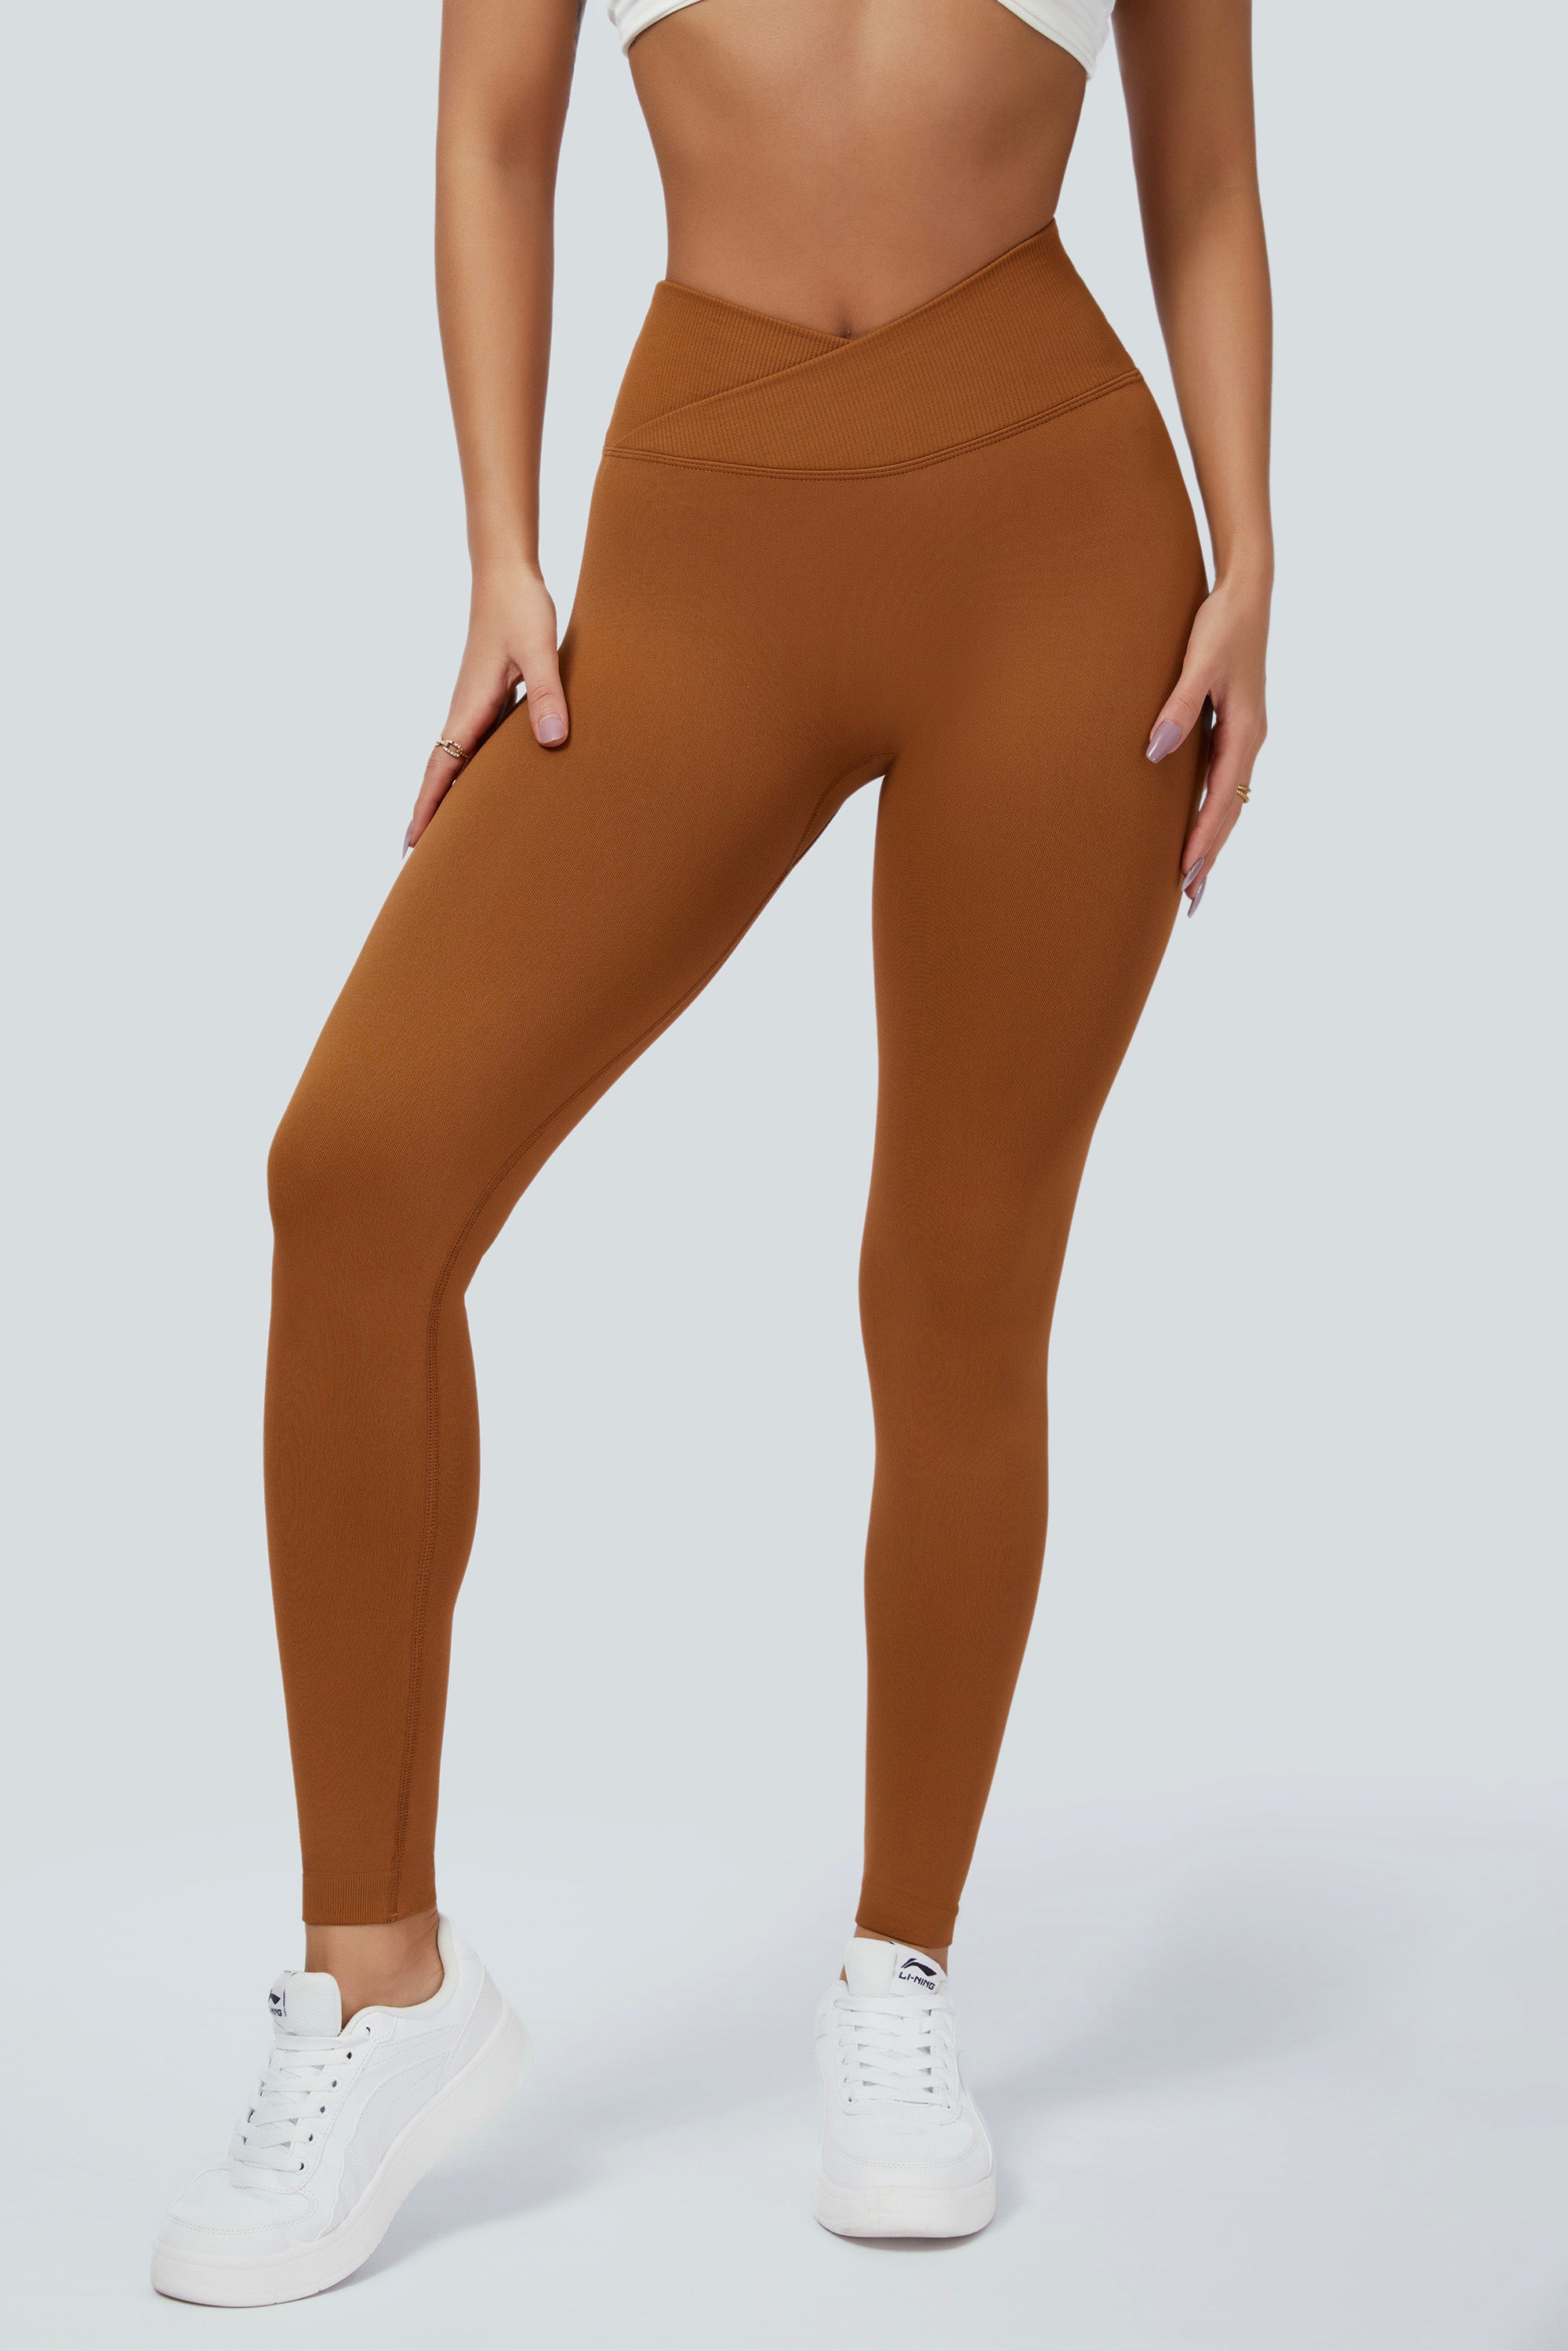 Suzette Milk Chocolate 5 High Waist Brushed Poly Leggings – a